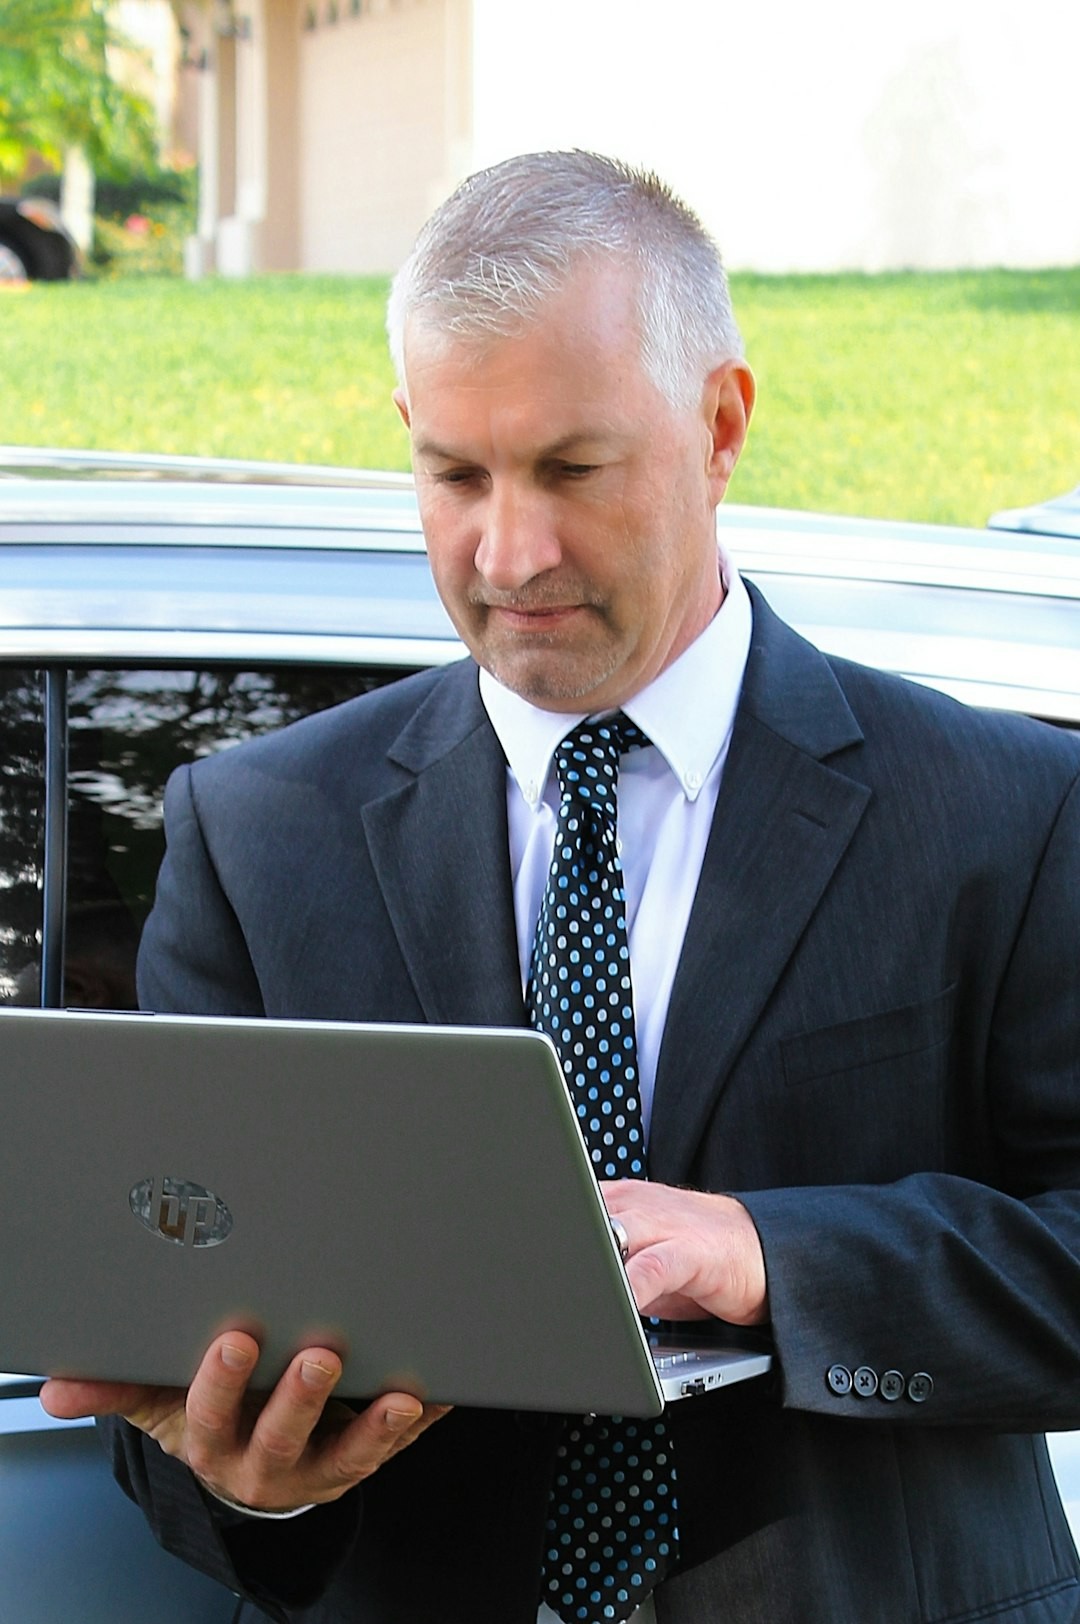 a man in a suit holding a tablet